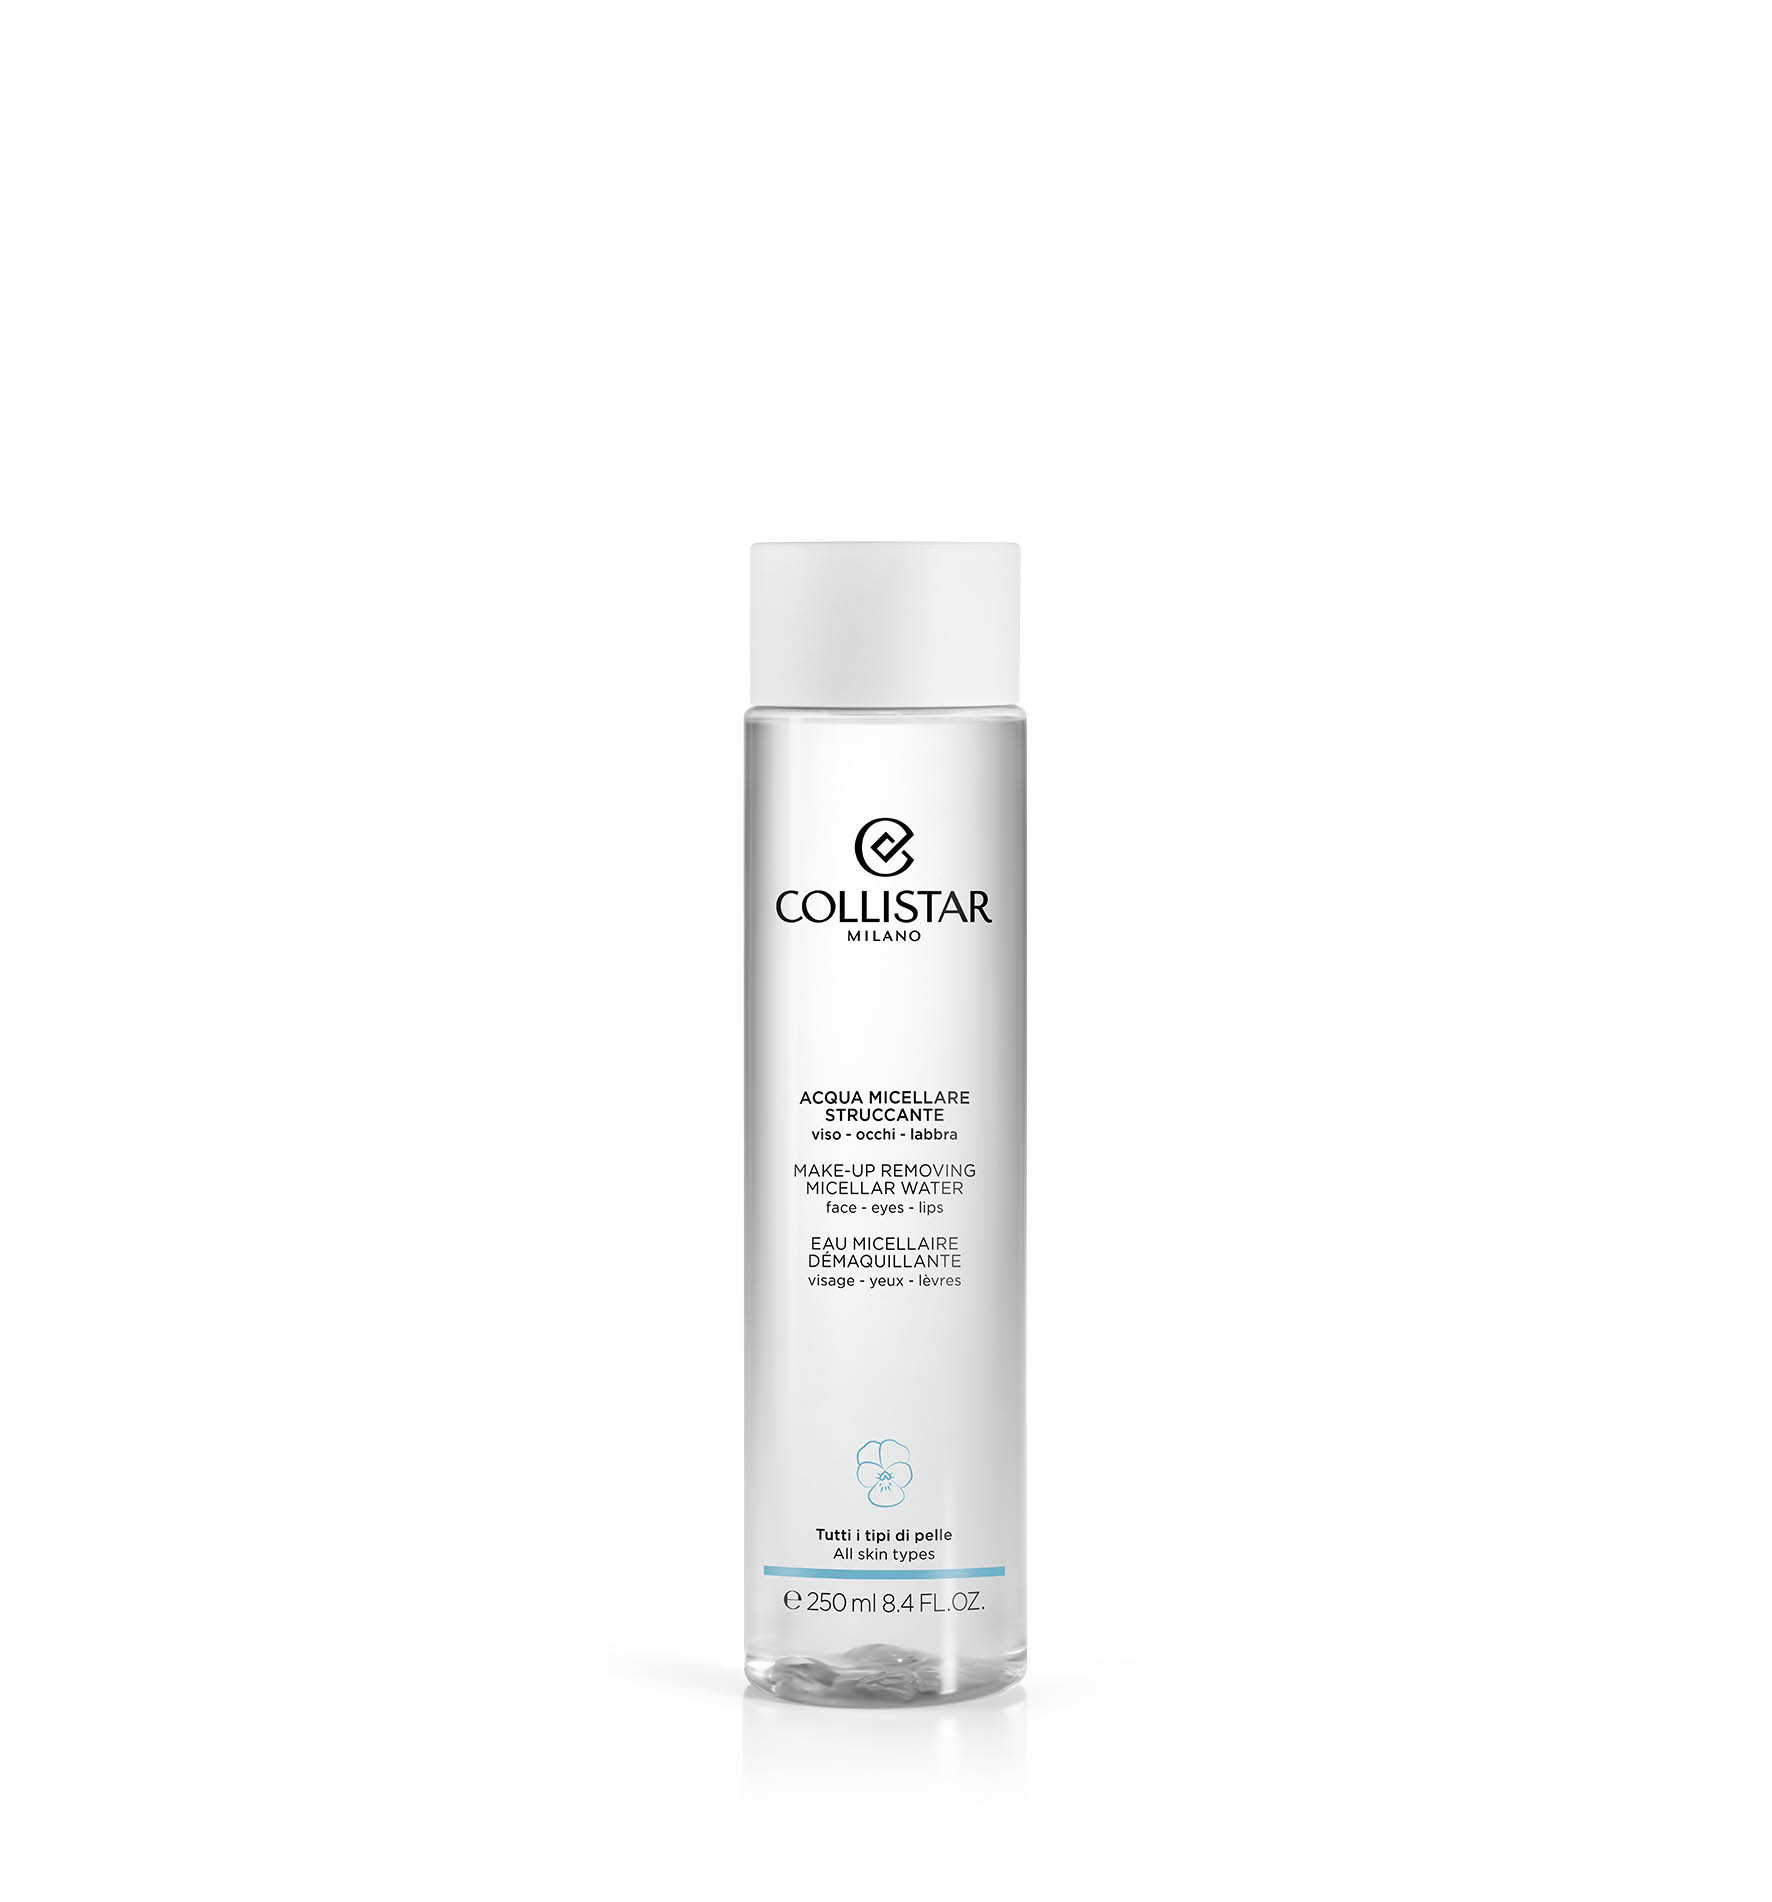 MAKE-UP REMOVING MICELLAR WATER FACE-EYES-LIPS - Face | Collistar - Shop Online Ufficiale